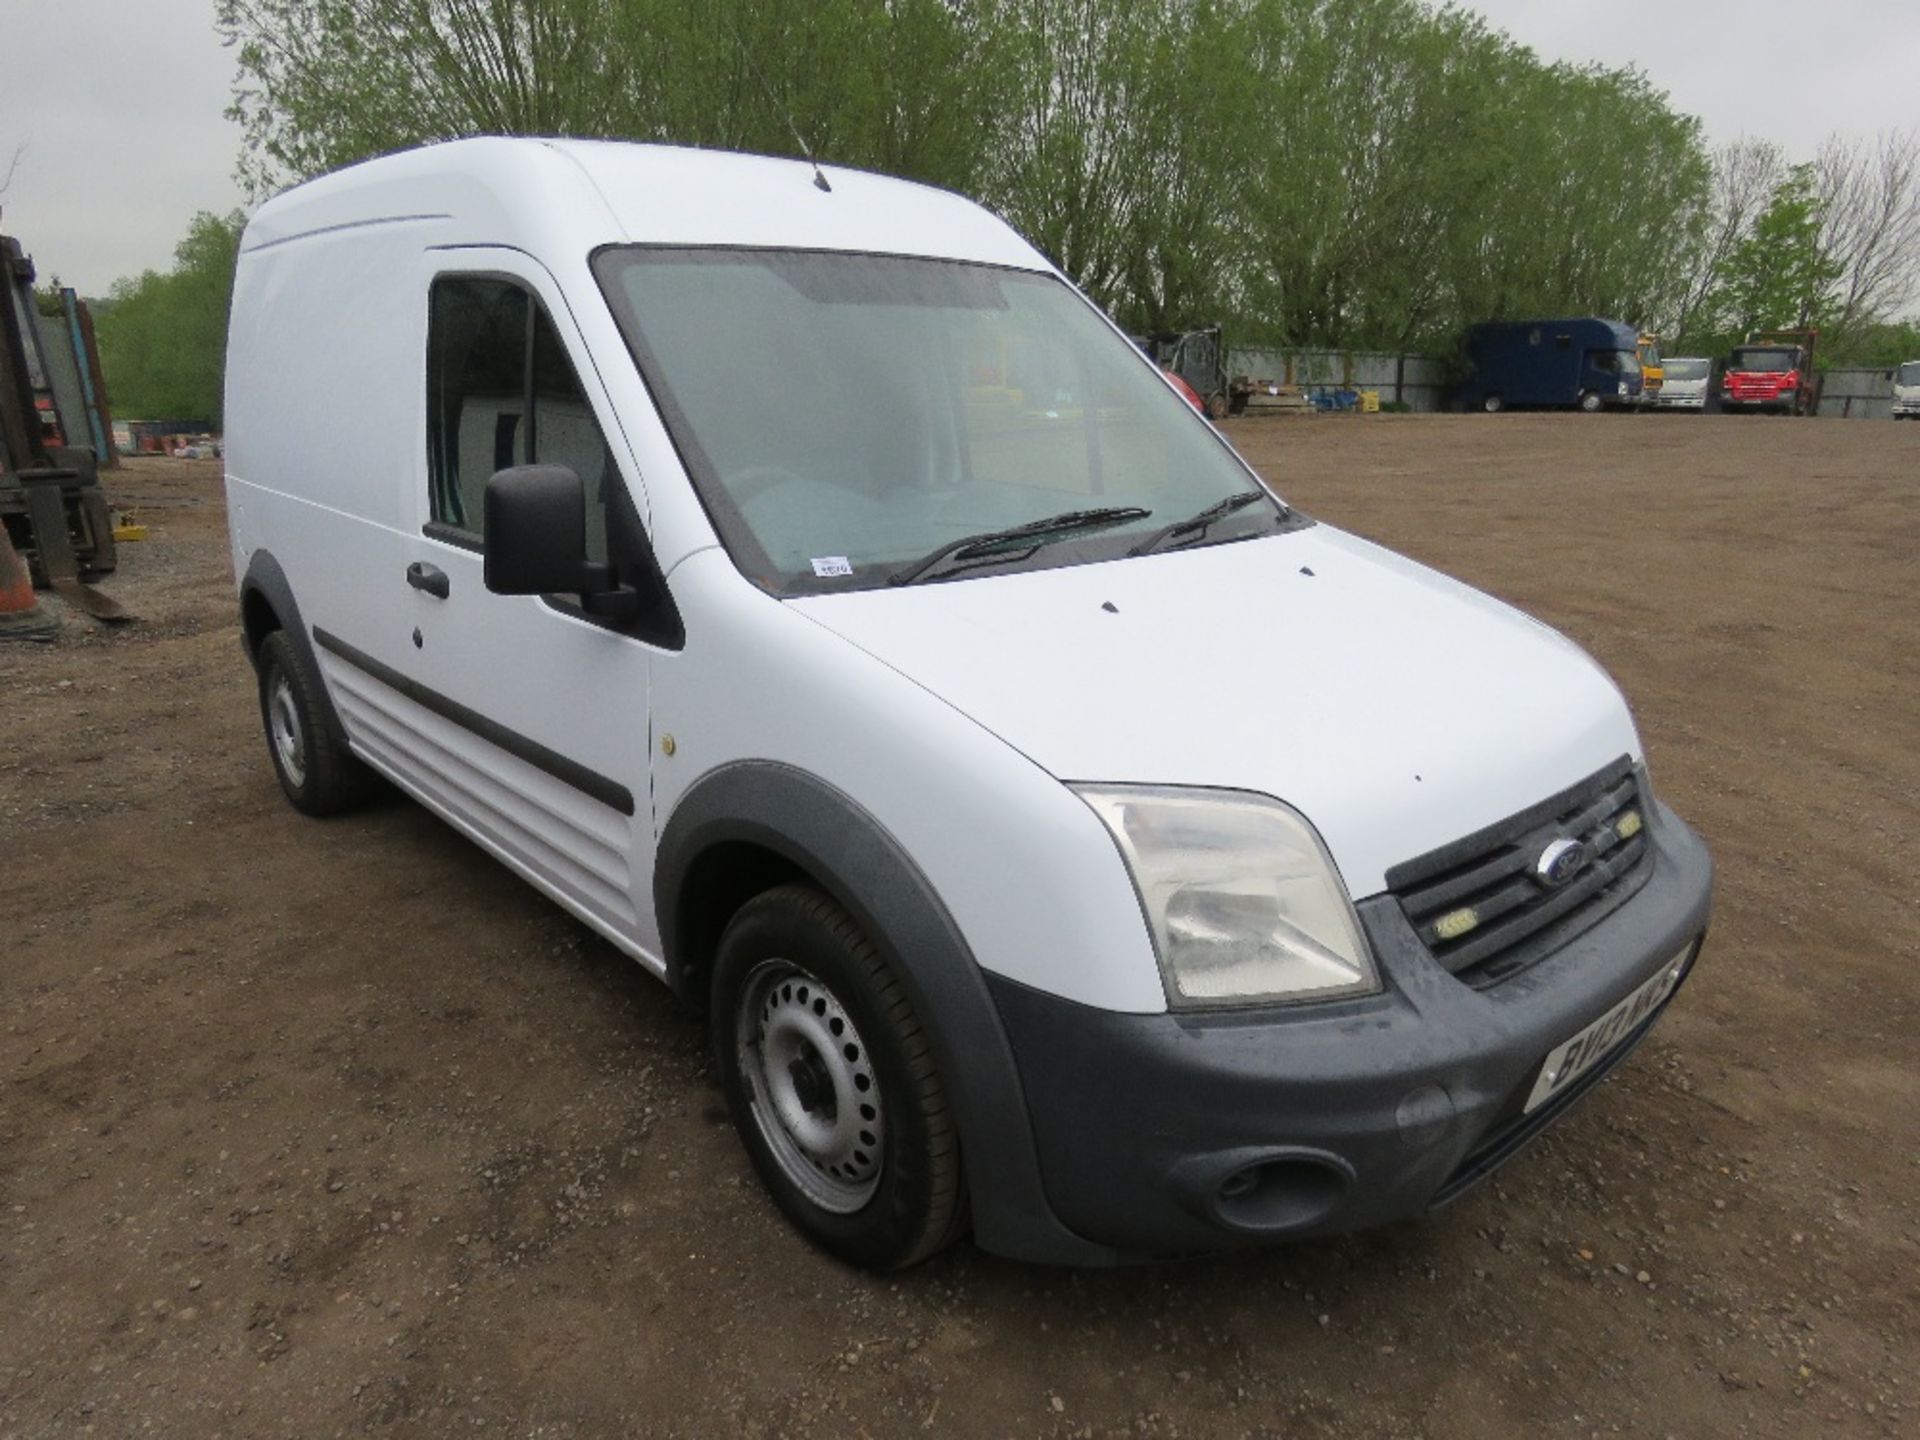 FORD TRANSIT CONNECT PANEL VAN REG:BV13 NKS 1.8LITRE. HIGH ROOF LWB. 83K REC MILES APPROX. WITH V5 A - Image 12 of 26